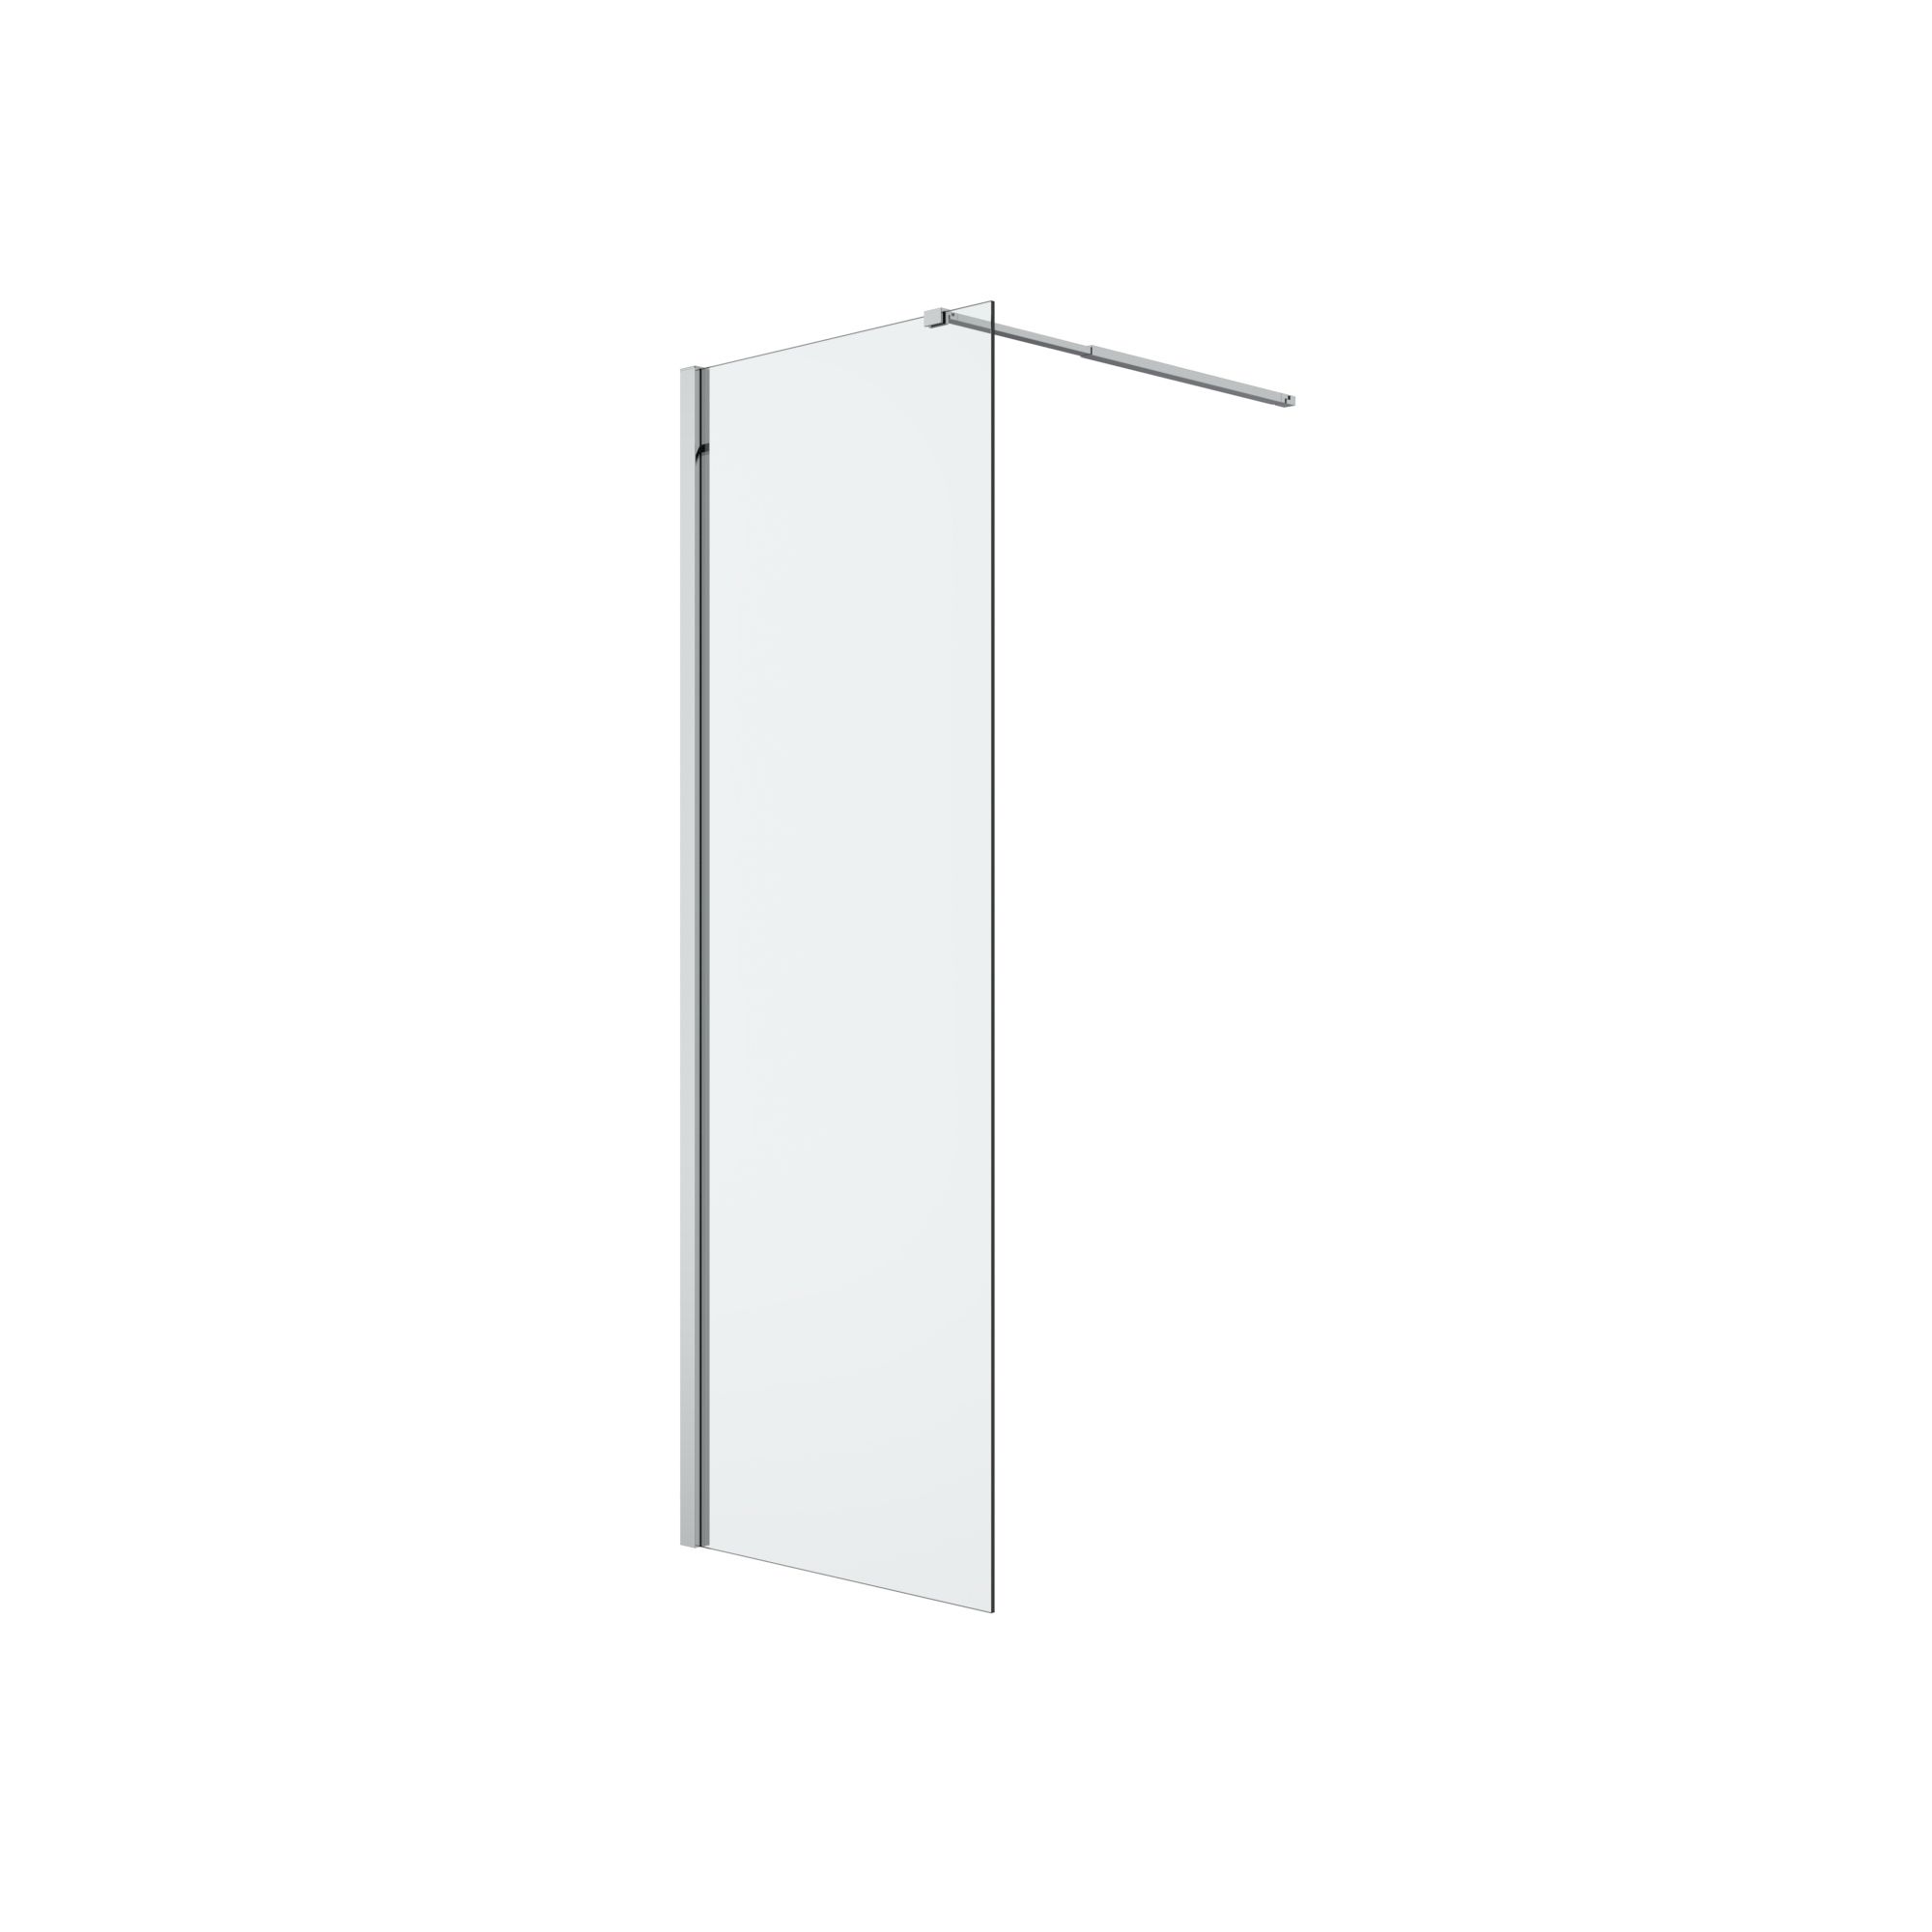 GoodHome Ledava Framed Clear Fixed Walk-in Front Walk-in shower panel (H)195cm (W)70cm